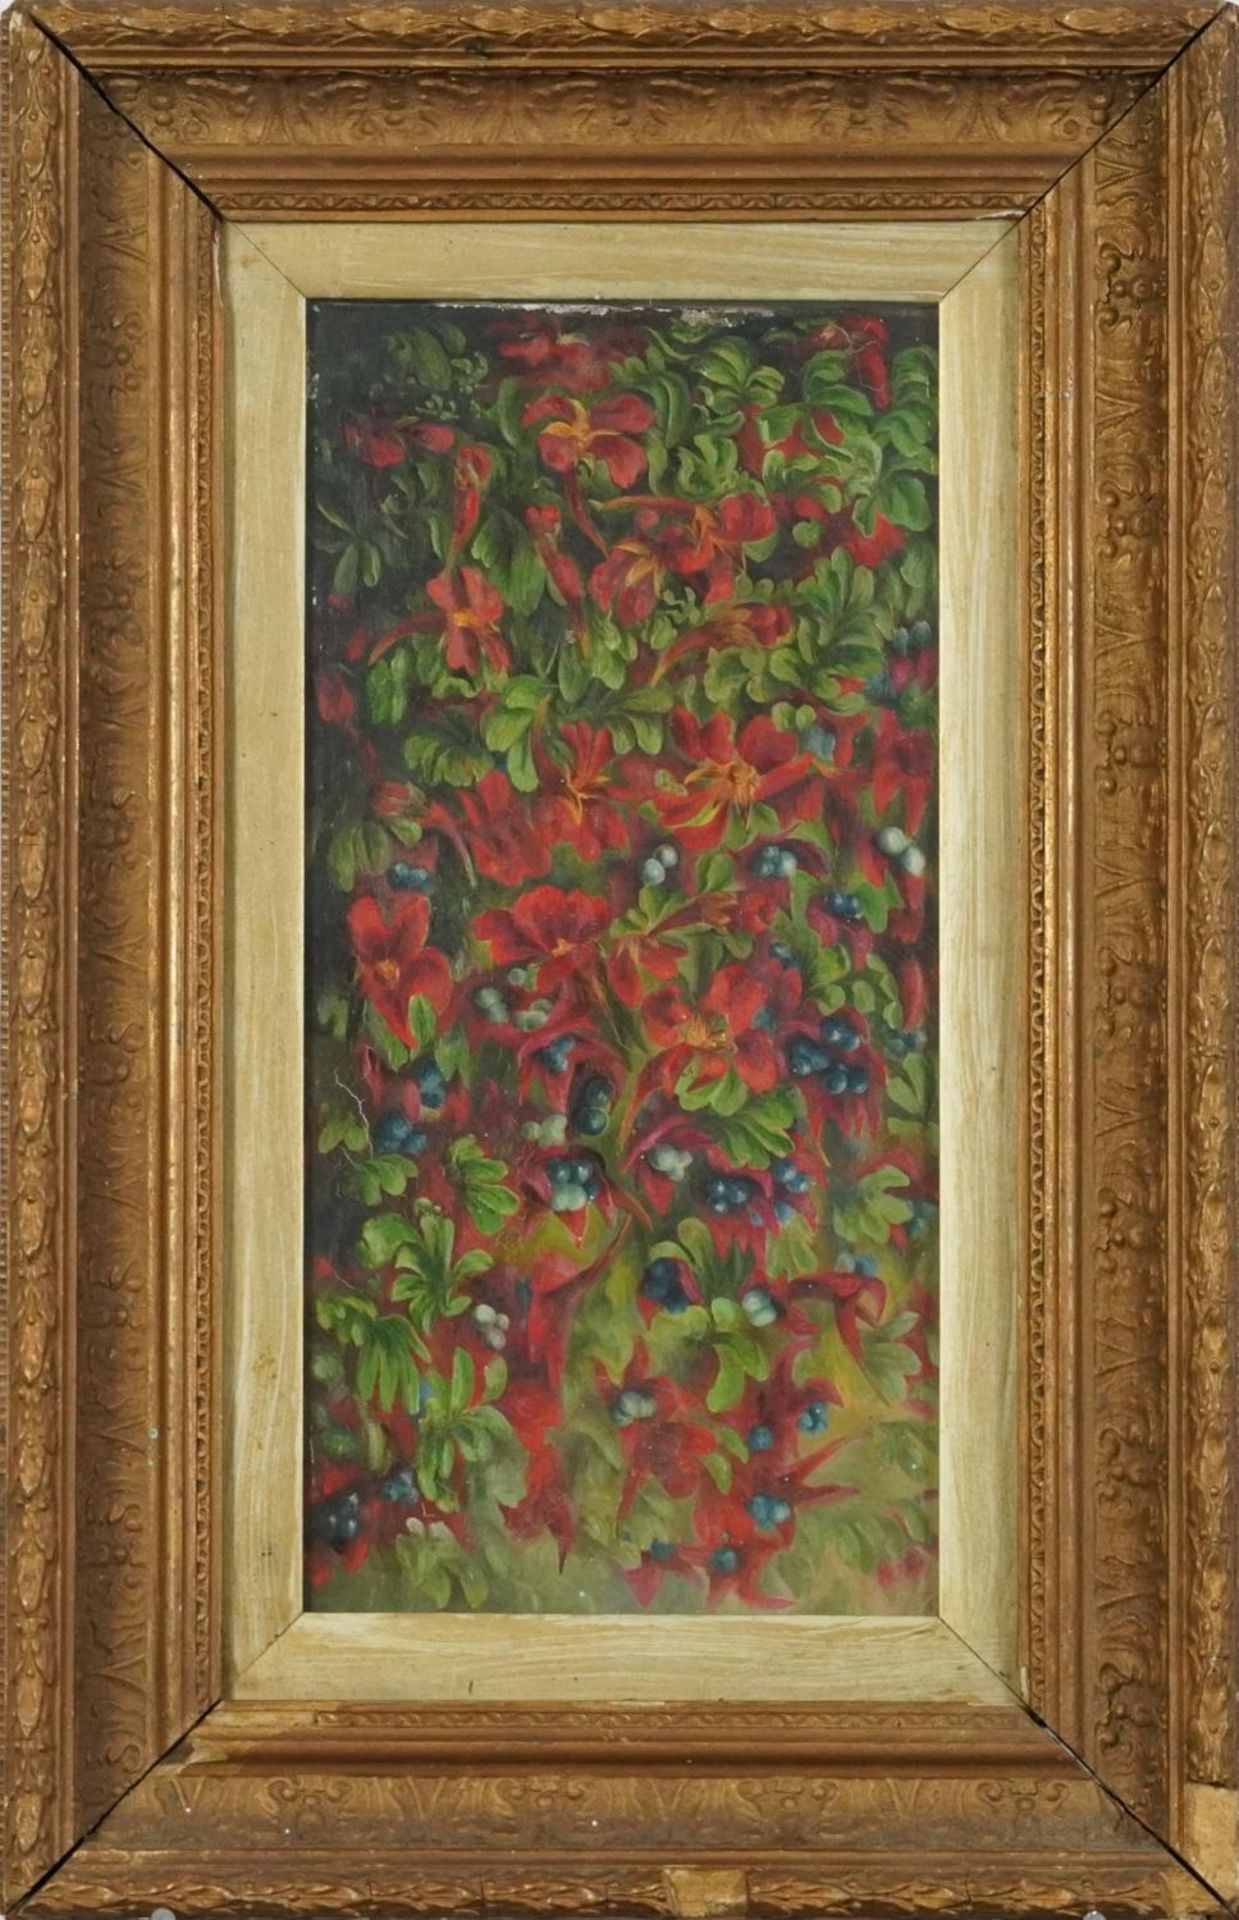 Flowers and berries, 20th century oil on canvas, Winsor & Newton stamp verso, mounted, framed and - Image 2 of 4